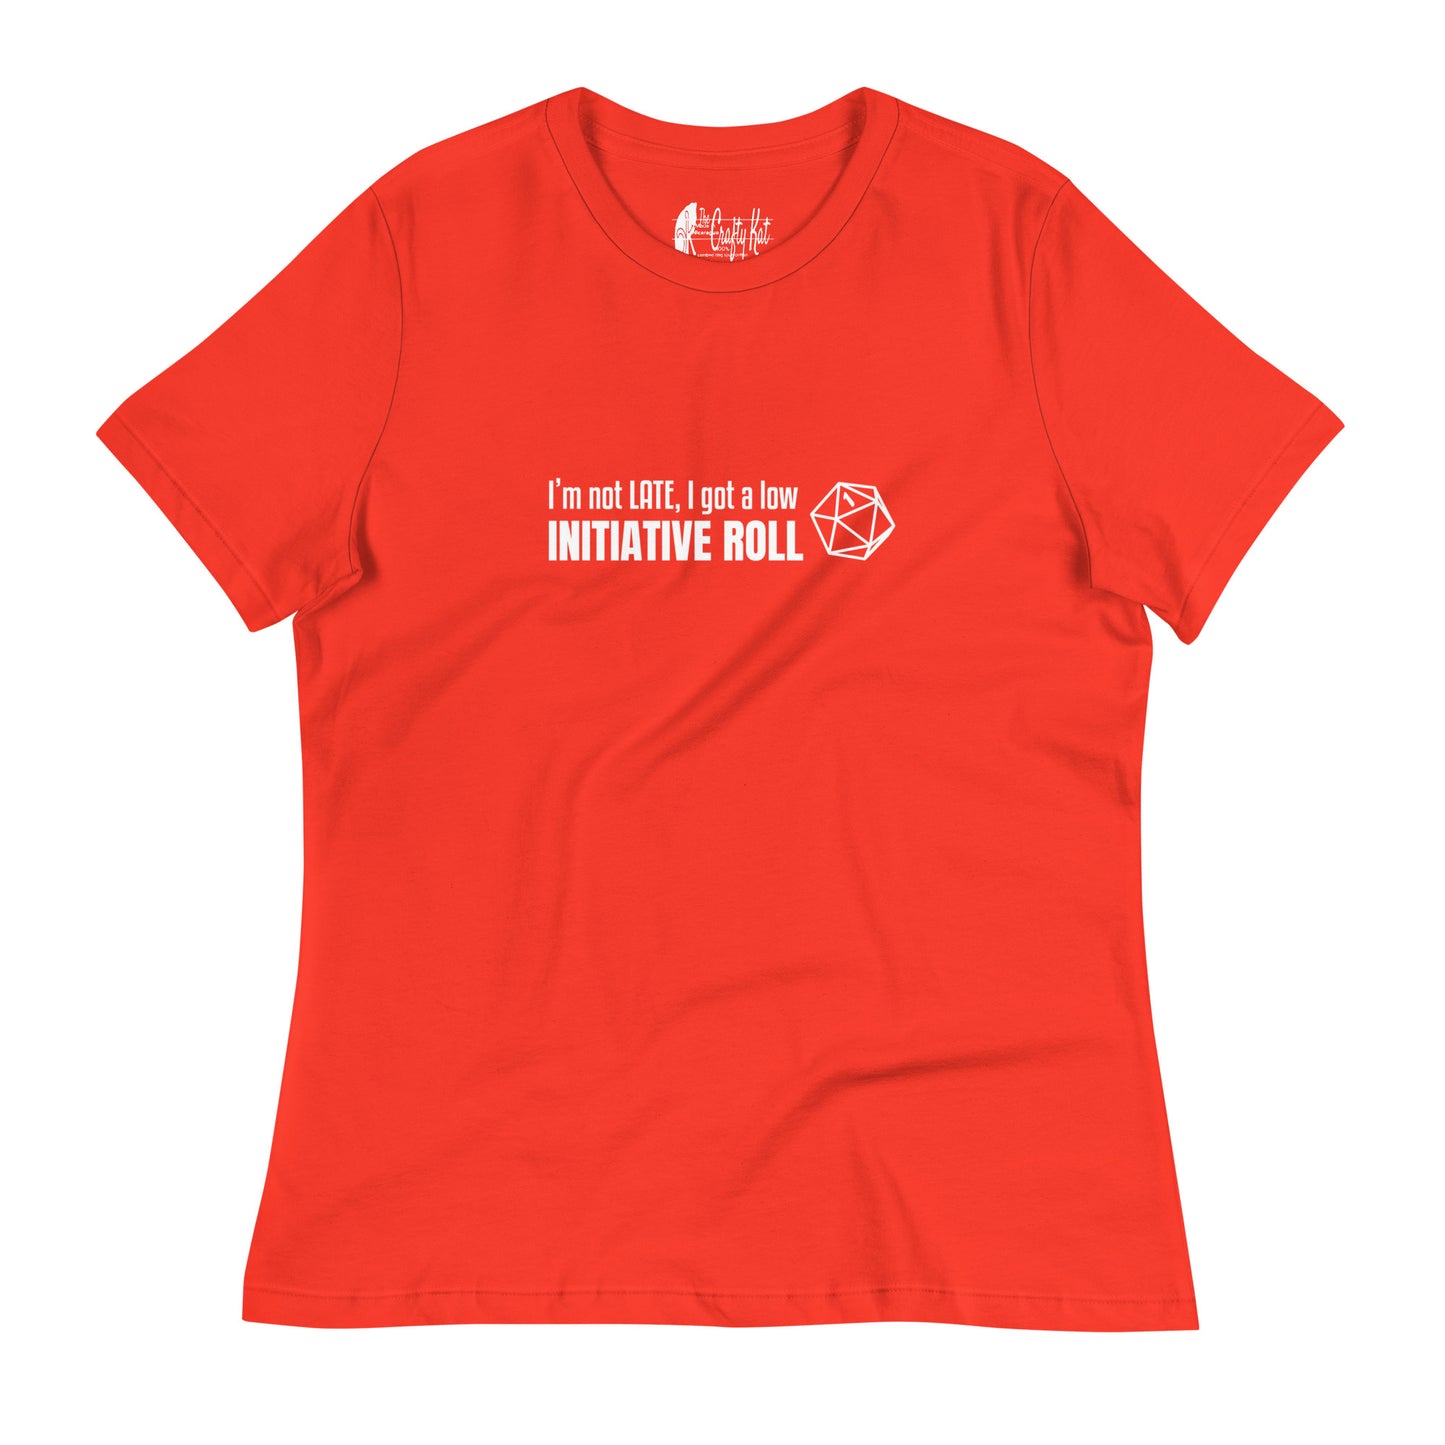 Poppy (bright red) women's relaxed-fit t-shirt with a graphic of a d20 (twenty-sided die) showing a roll of "1" and text: "I'm not LATE, I got a low INITIATIVE ROLL"